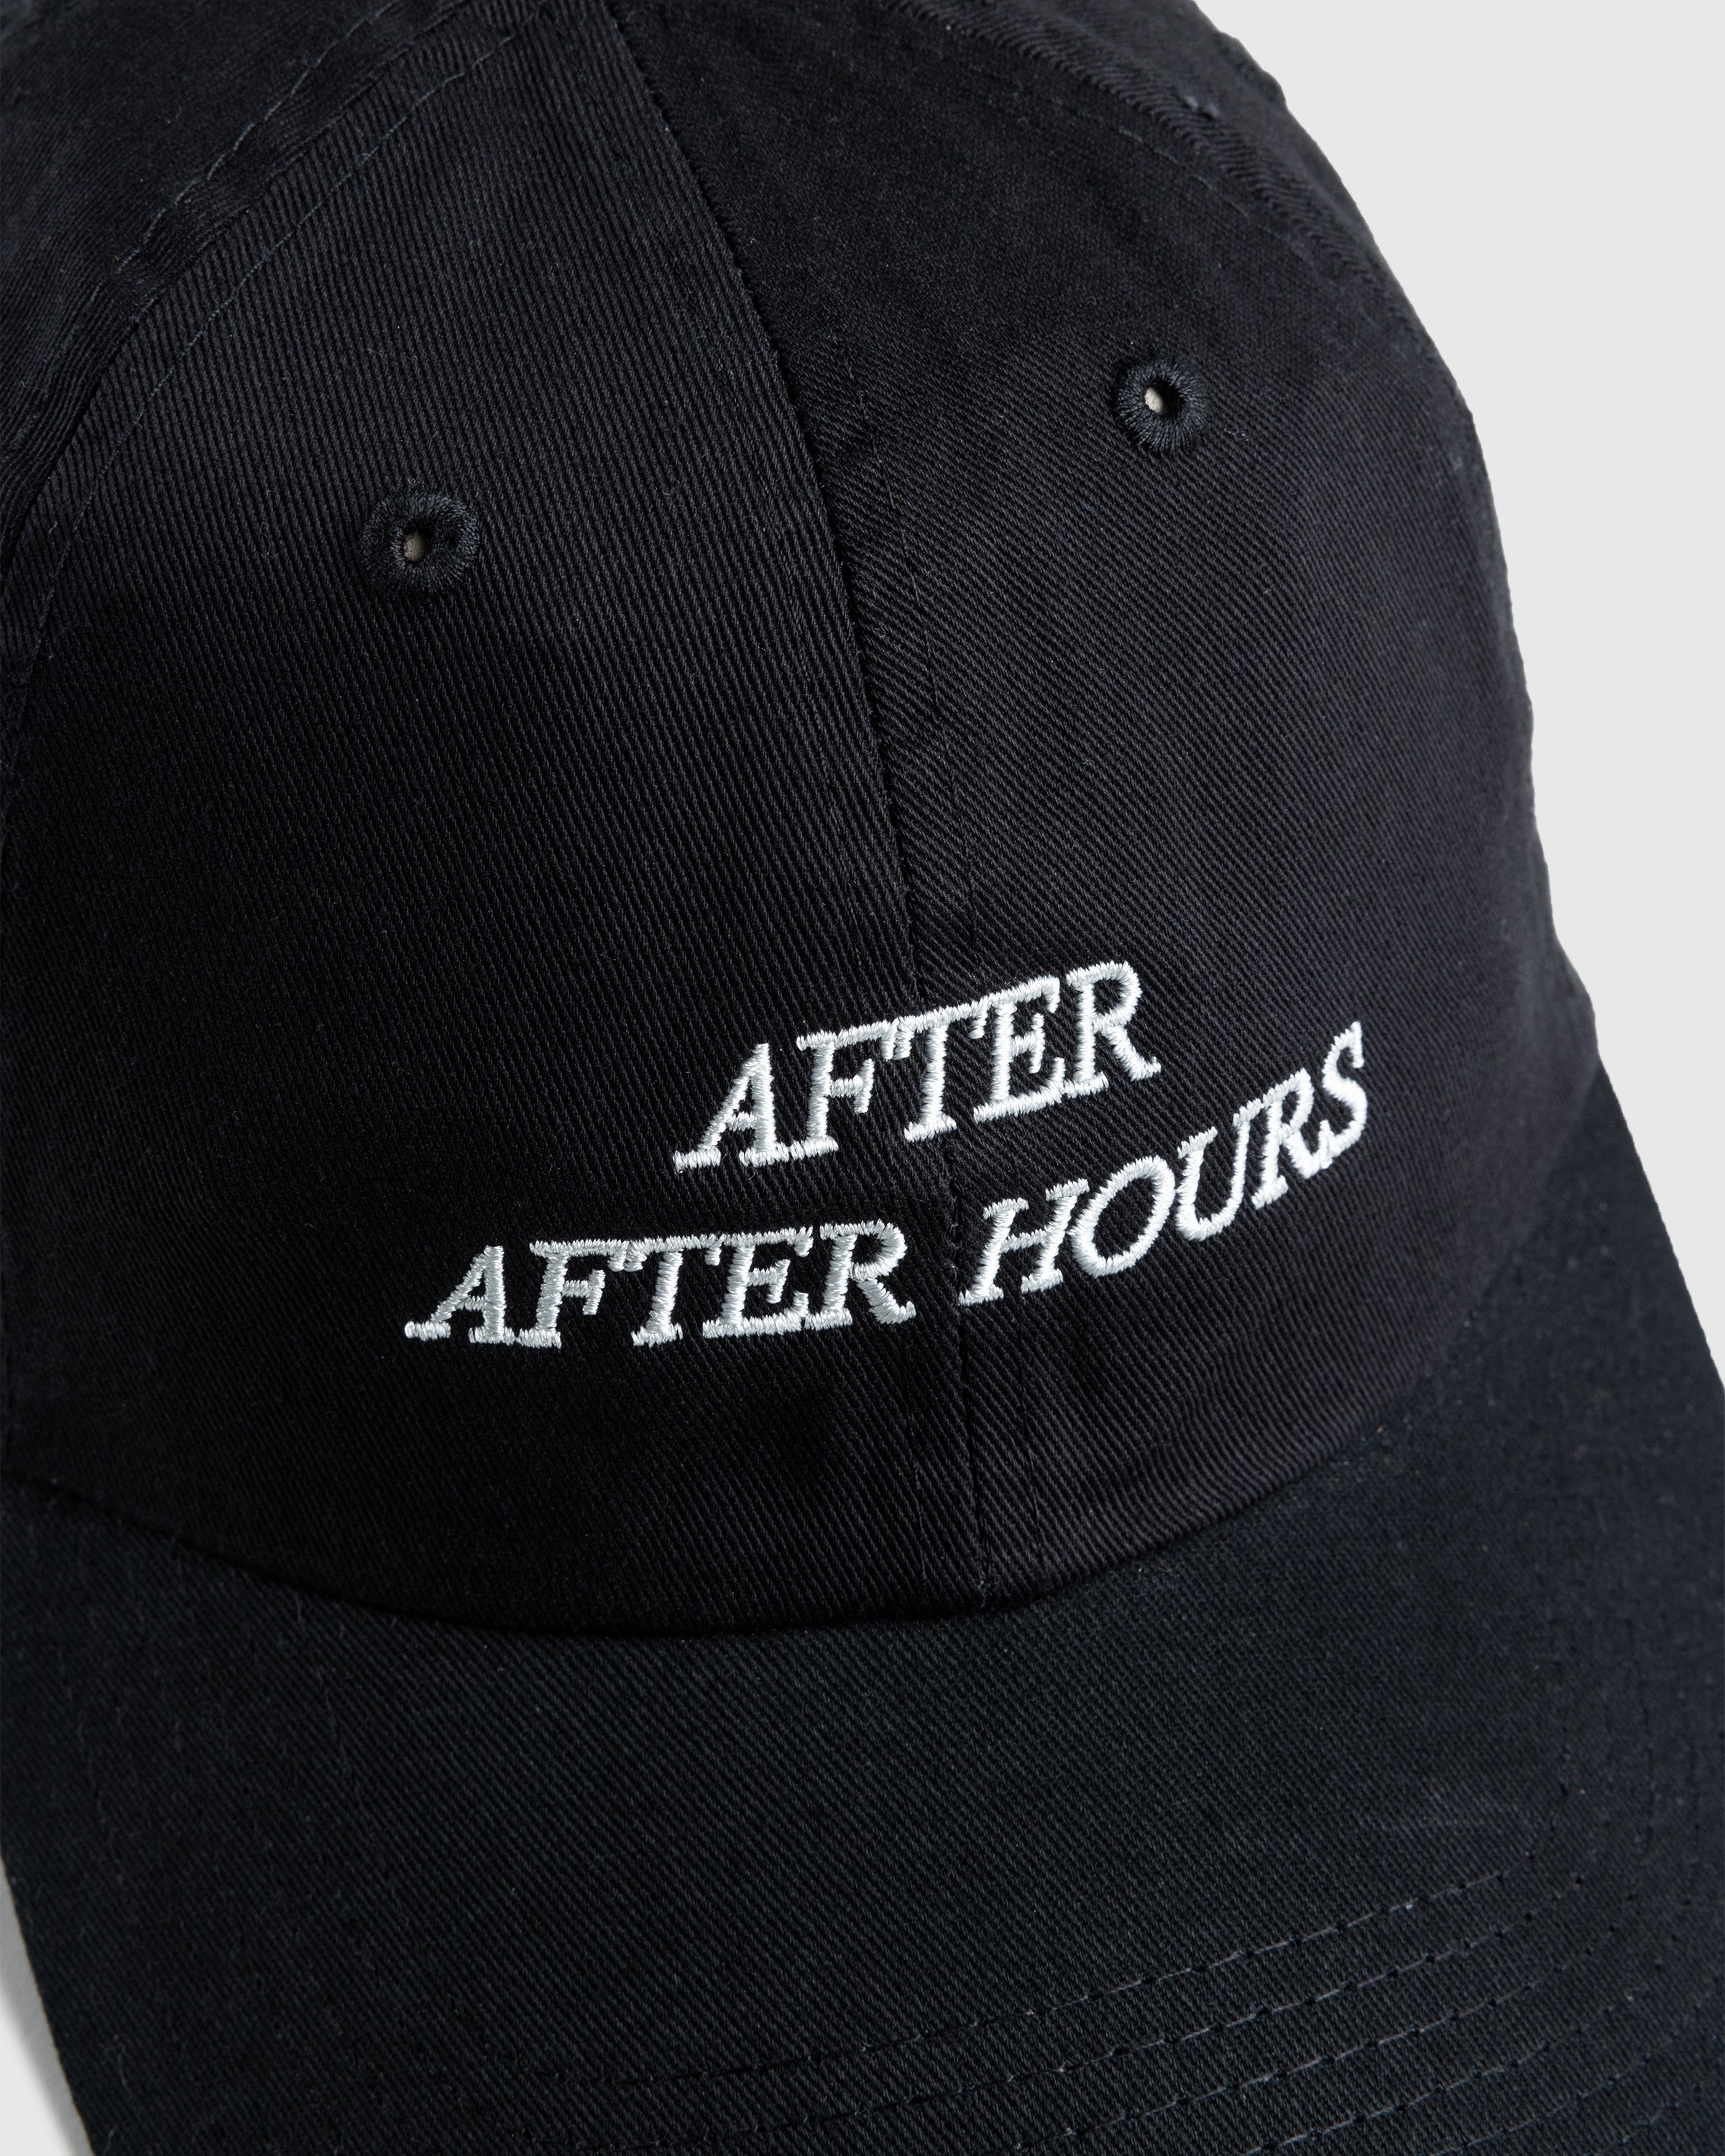 HO HO COCO - AFTER AFTER HOURS BLACK X LT GREY - Accessories - Black - Image 5